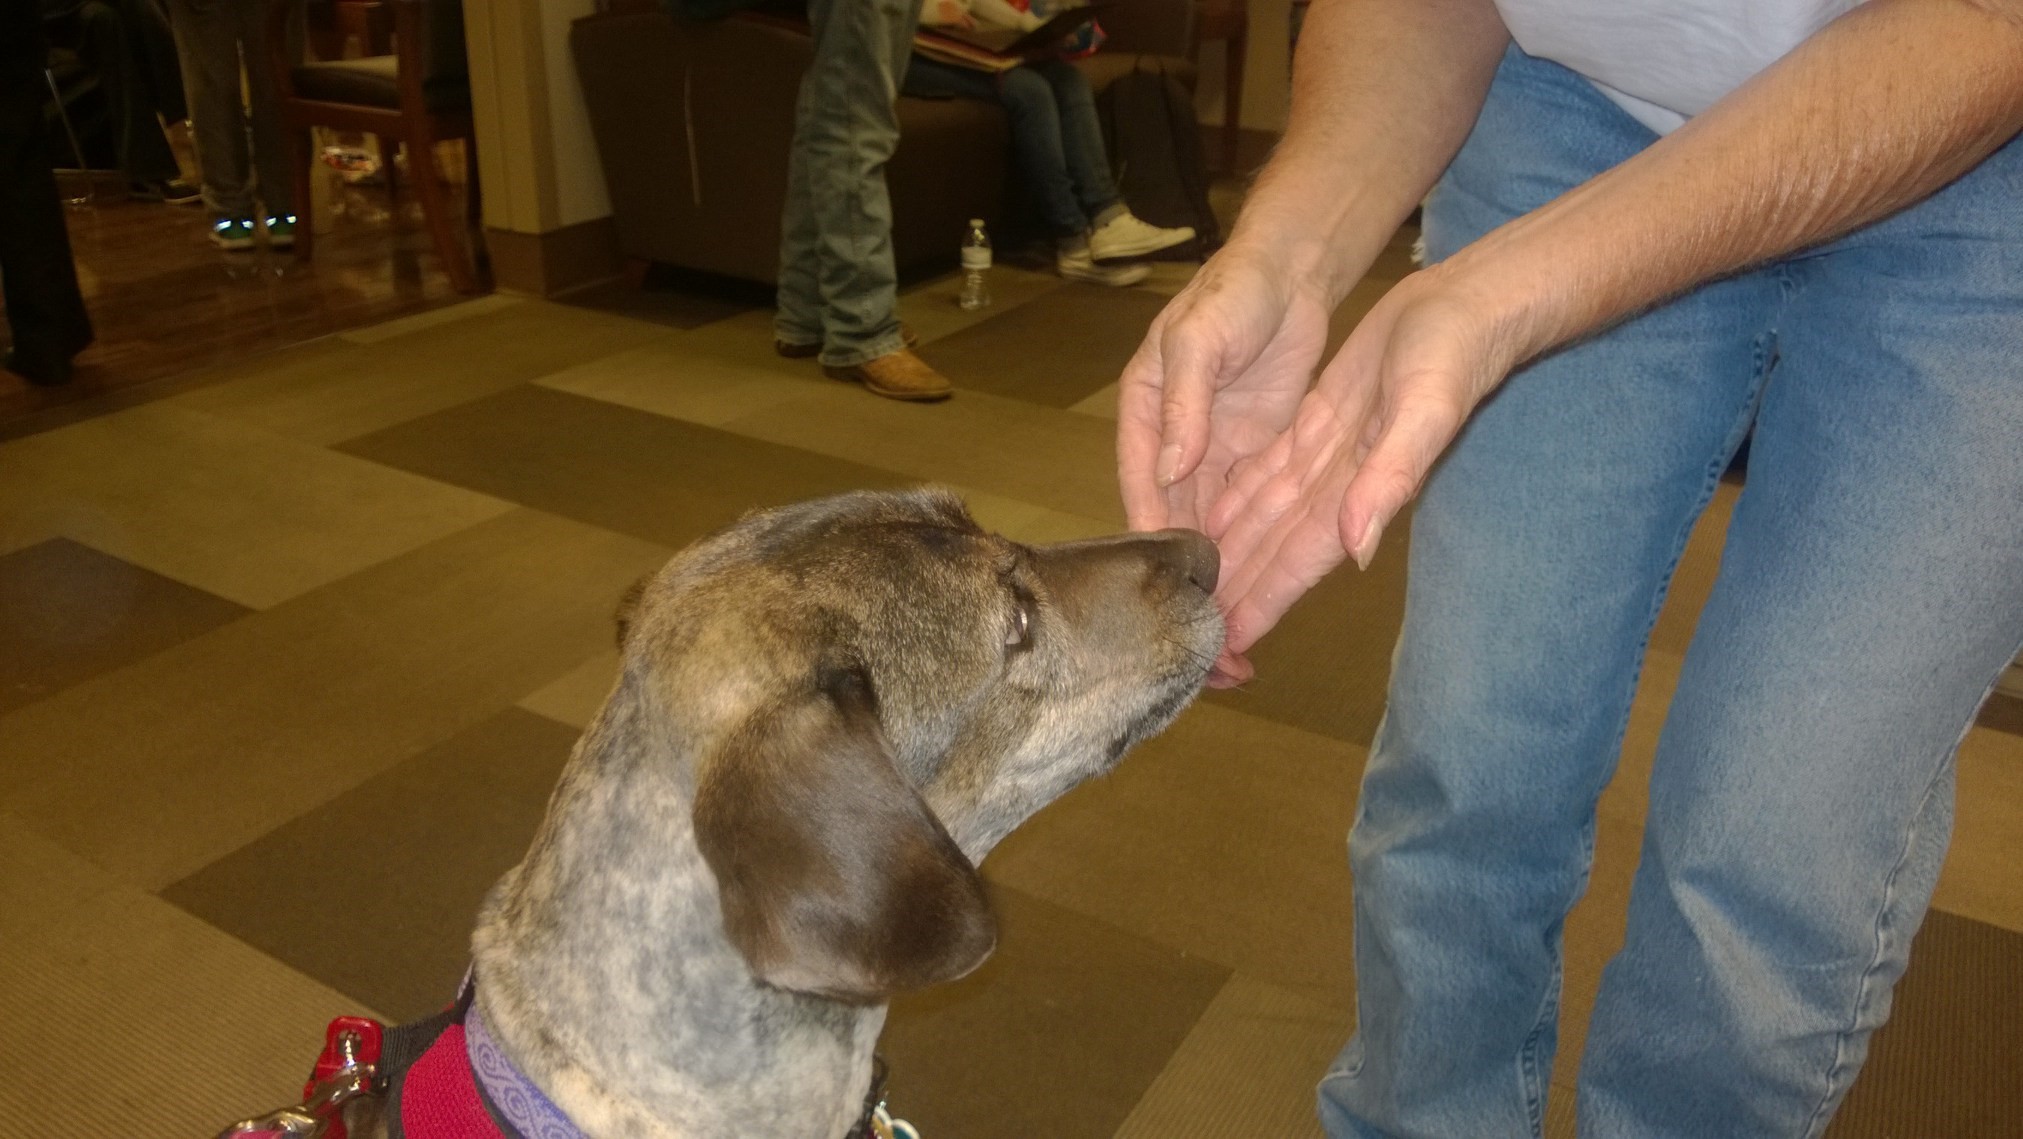 A therapy dog licking a person's hands